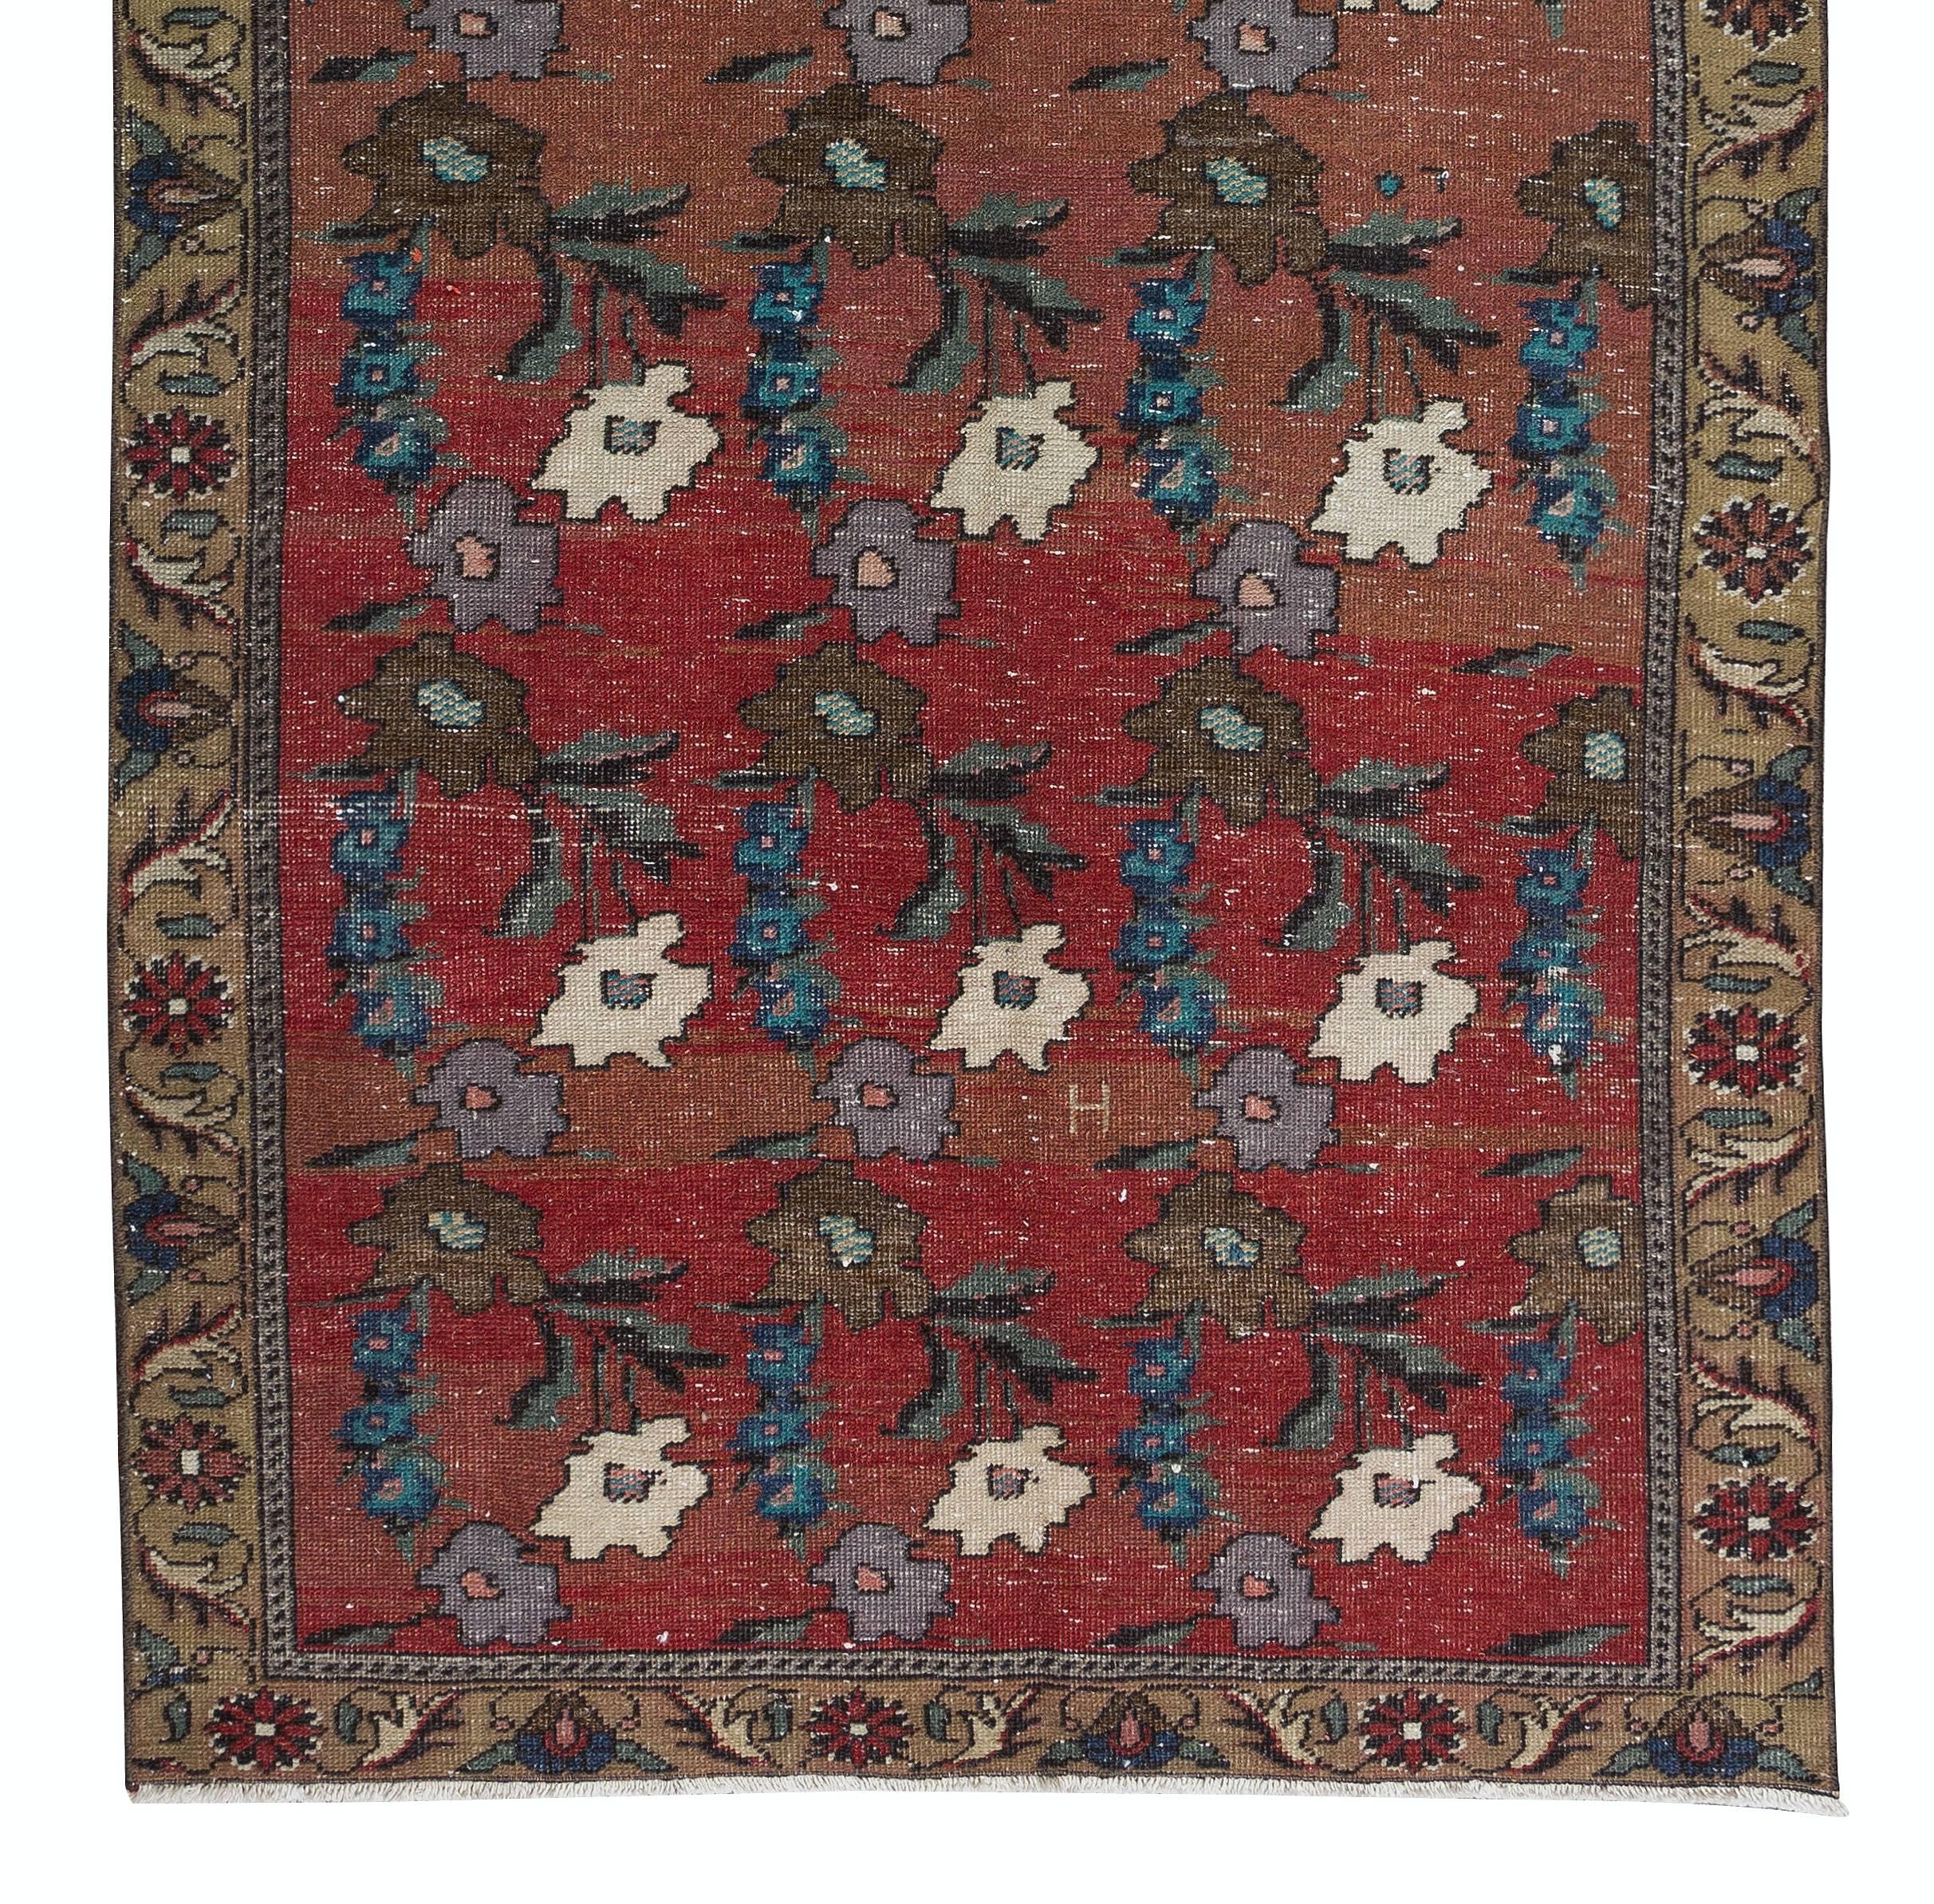 3.9x8.4 Ft Vintage Handmade Floral Pattern Turkish Rug in Red, Blue & Beige In Good Condition For Sale In Philadelphia, PA